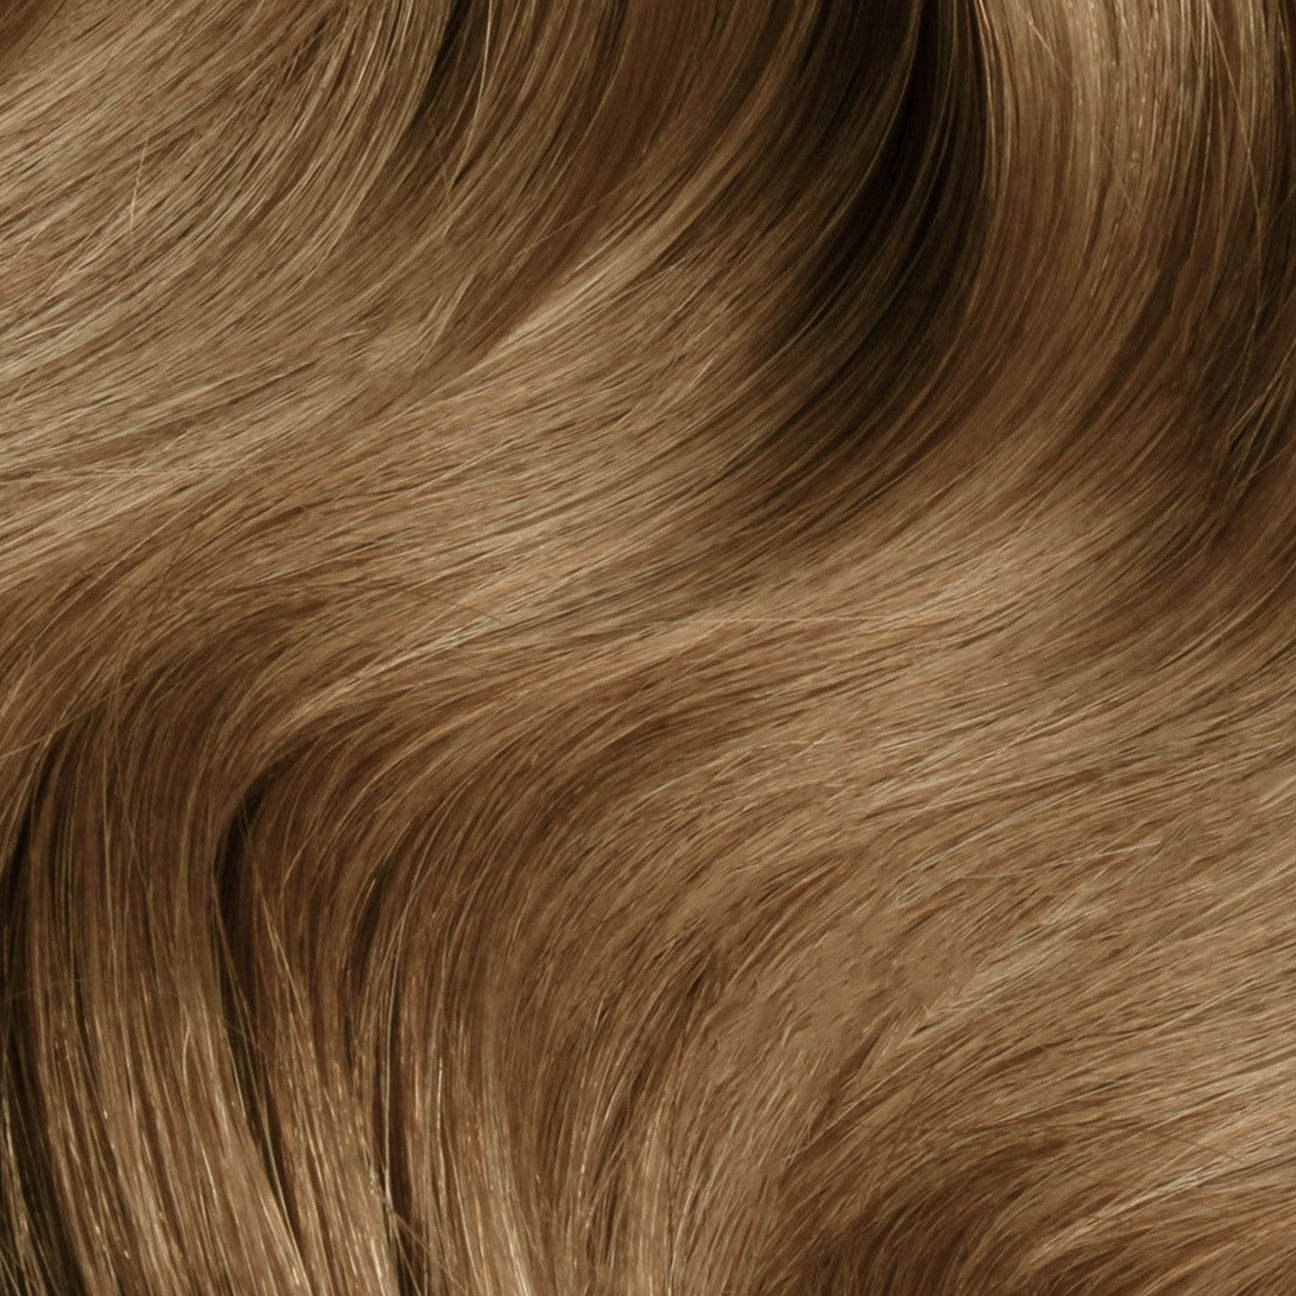 Nano Bonds 18 Inches - SWAY Hair Extensions Cappuccino-4-8 Ultra-fine, invisible bonds for a flawless, natural look. 100% Remy Human hair, lightweight and versatile. Reusable and perfect for individual or salon use.